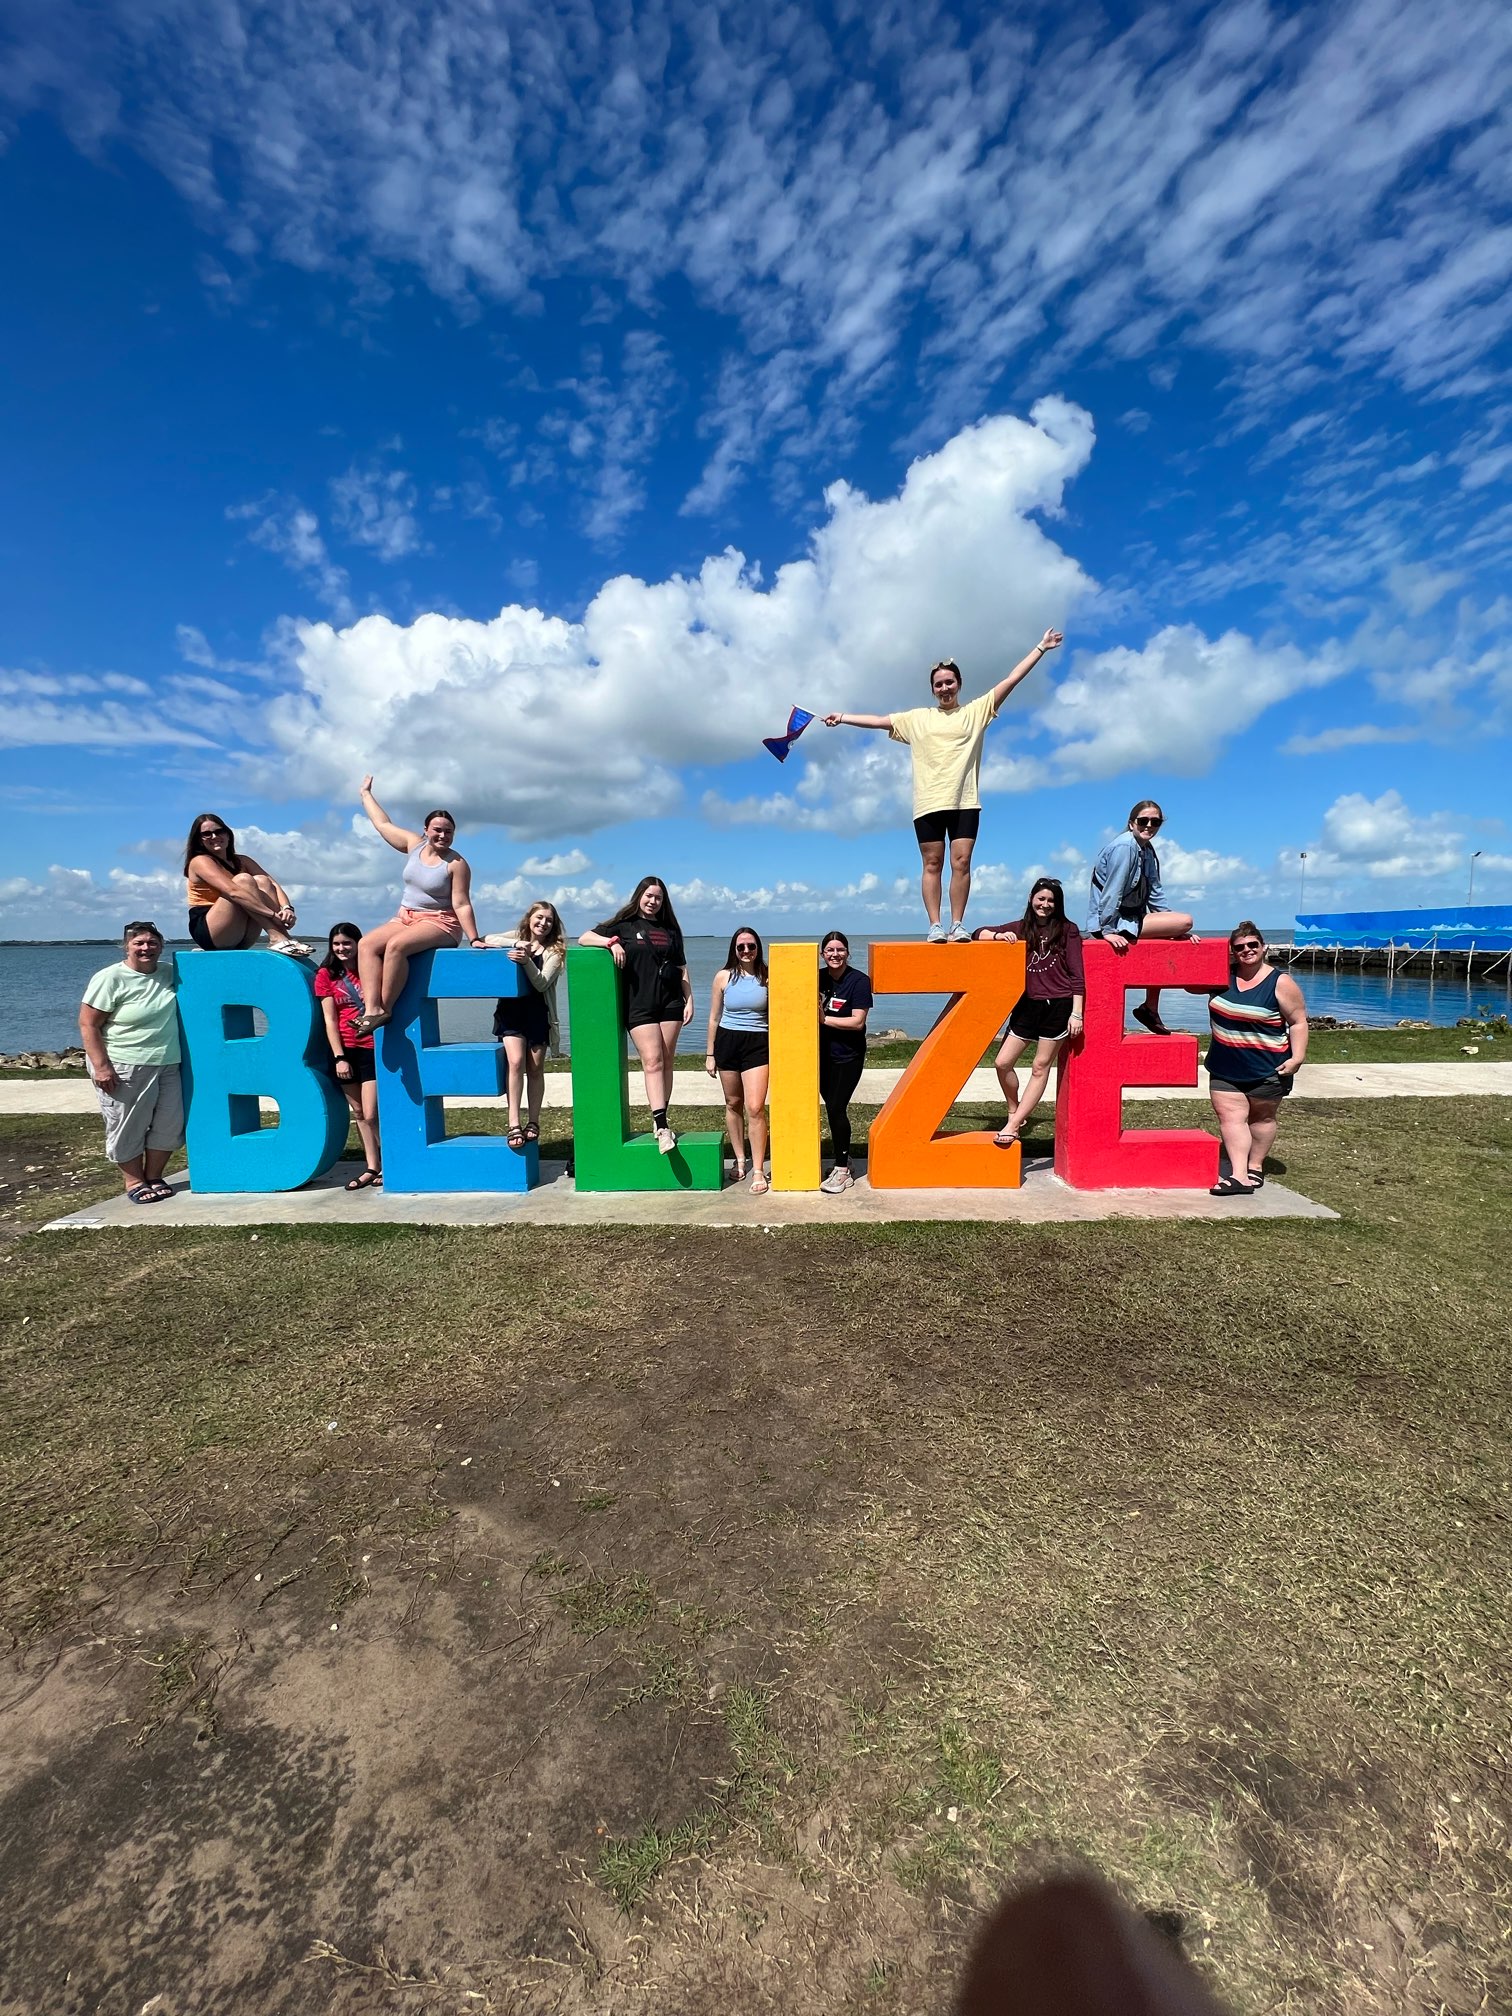 Illinois state university at the Belize sign!